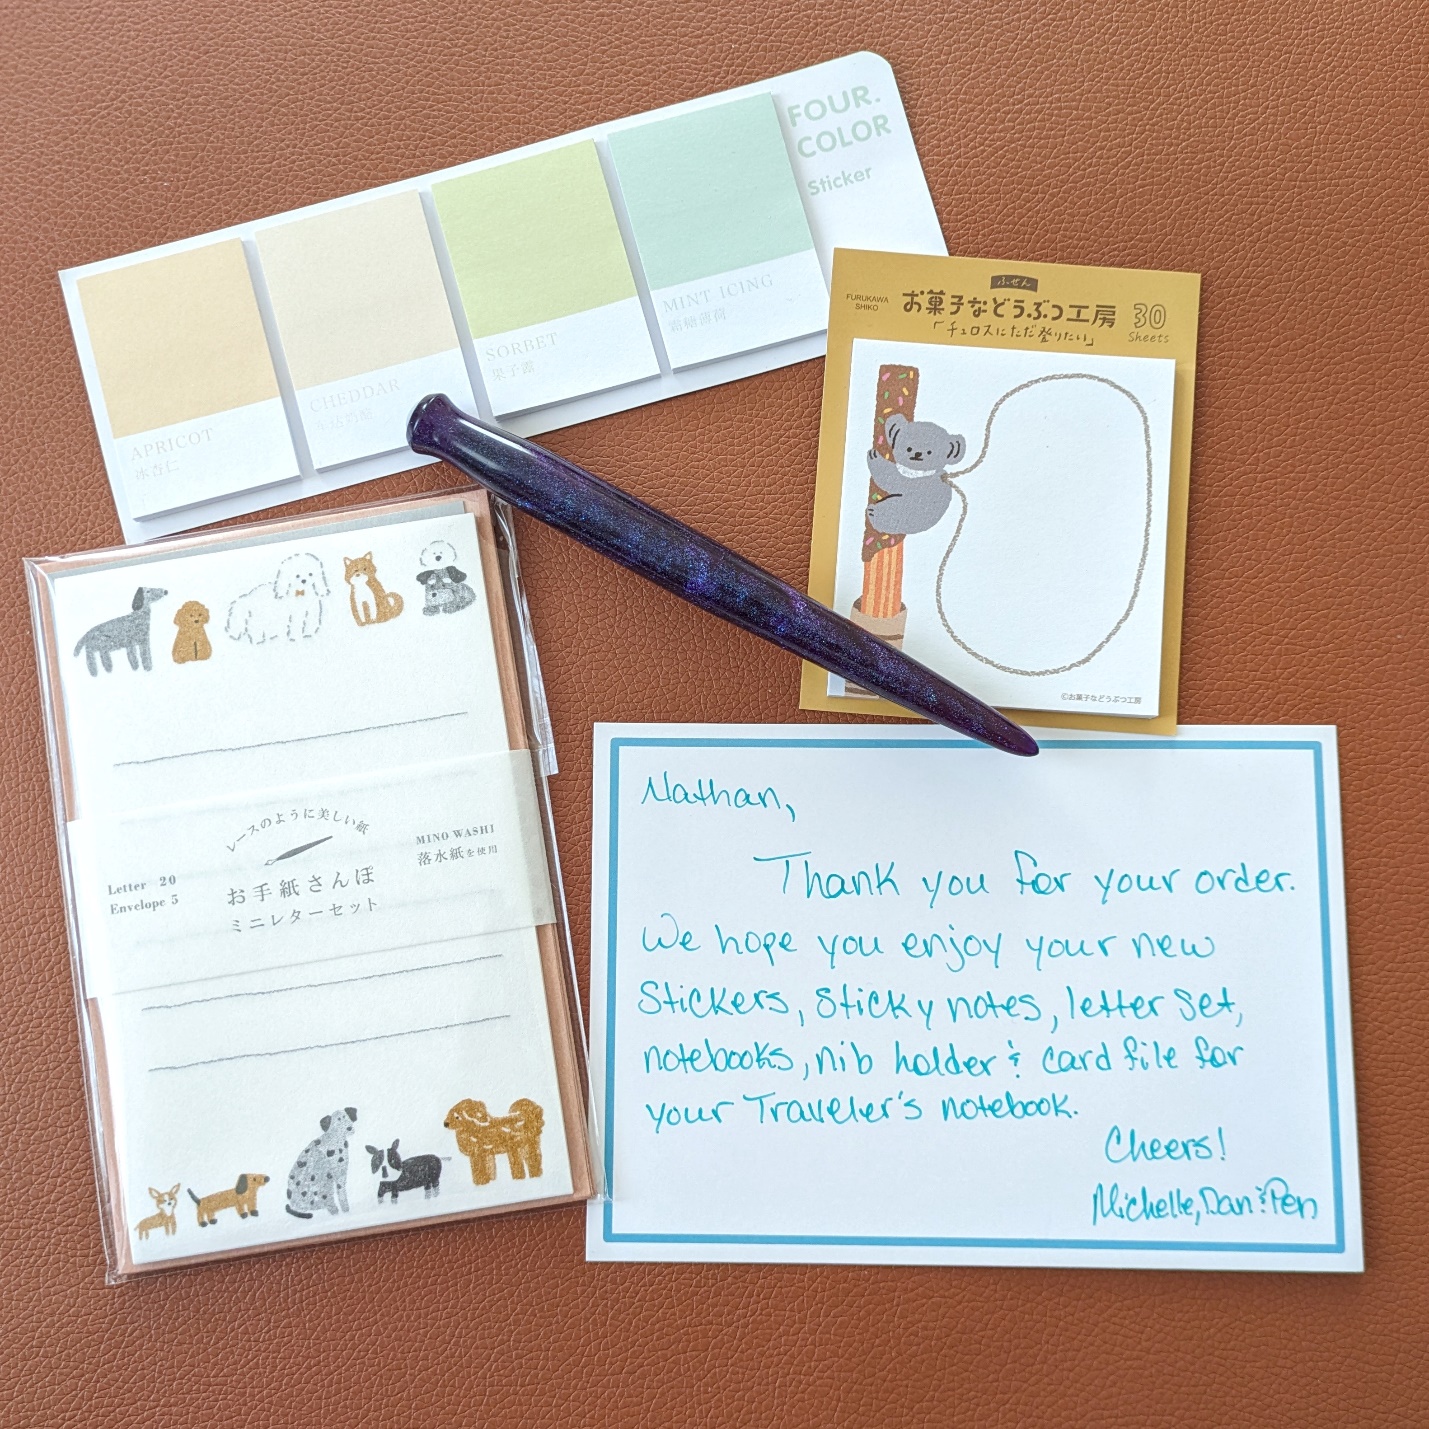 The dog stationery is going to make a perfect gift for someone. 